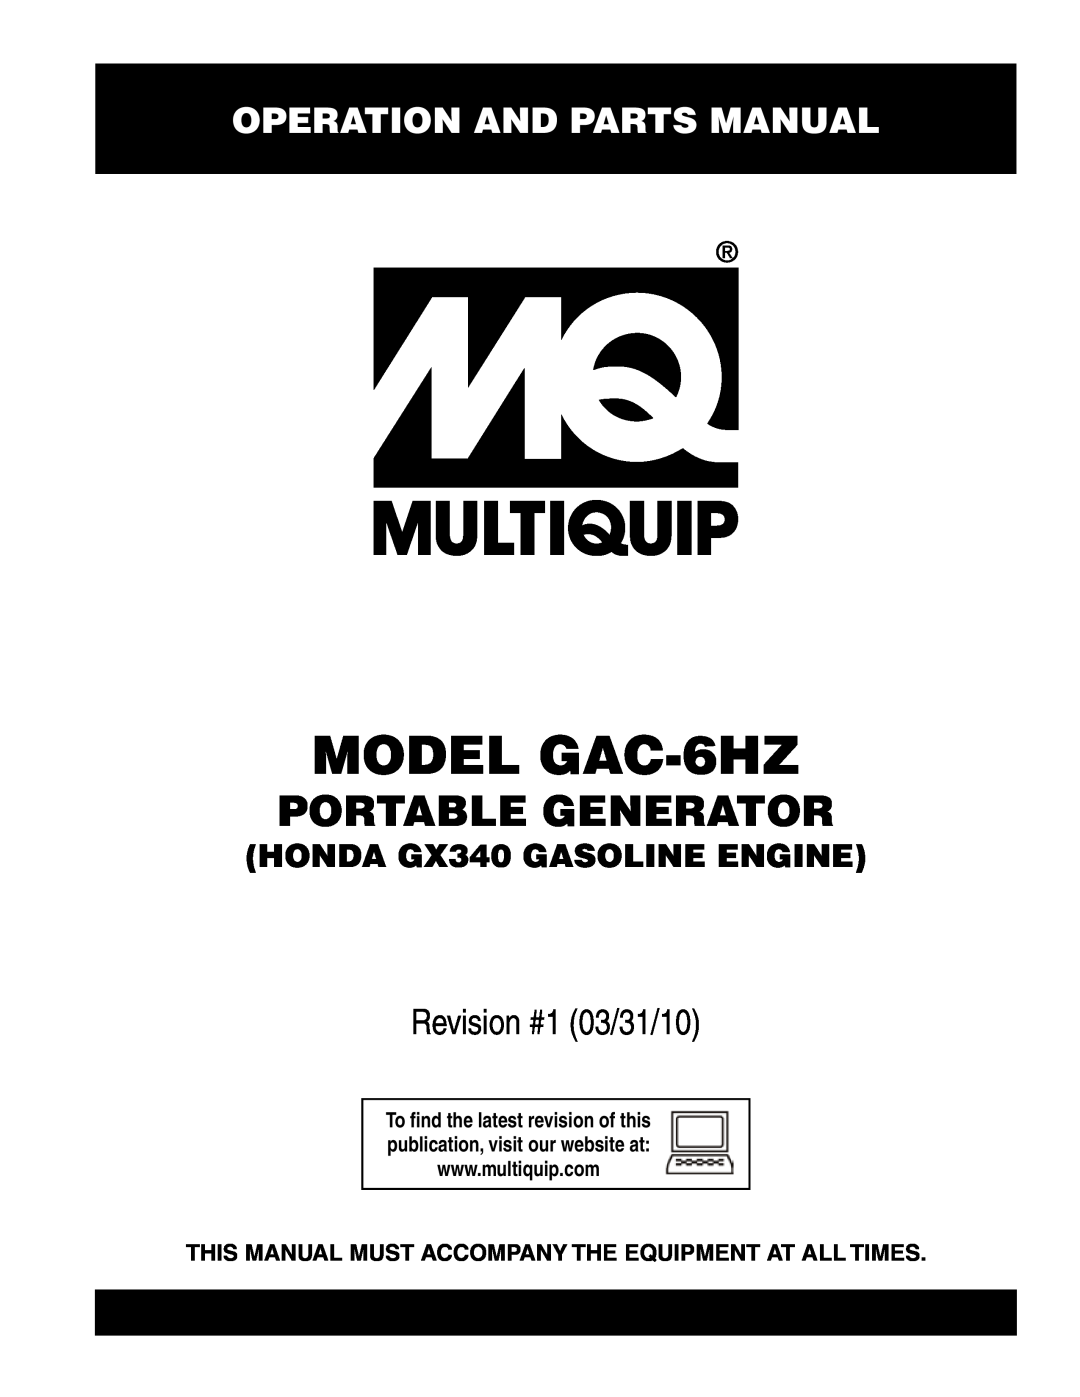 Multiquip GAC6HZ manual Operation and Parts Manual, This Manual Must Accompany The Equipment At All Times, MODEL gaC-6HZ 